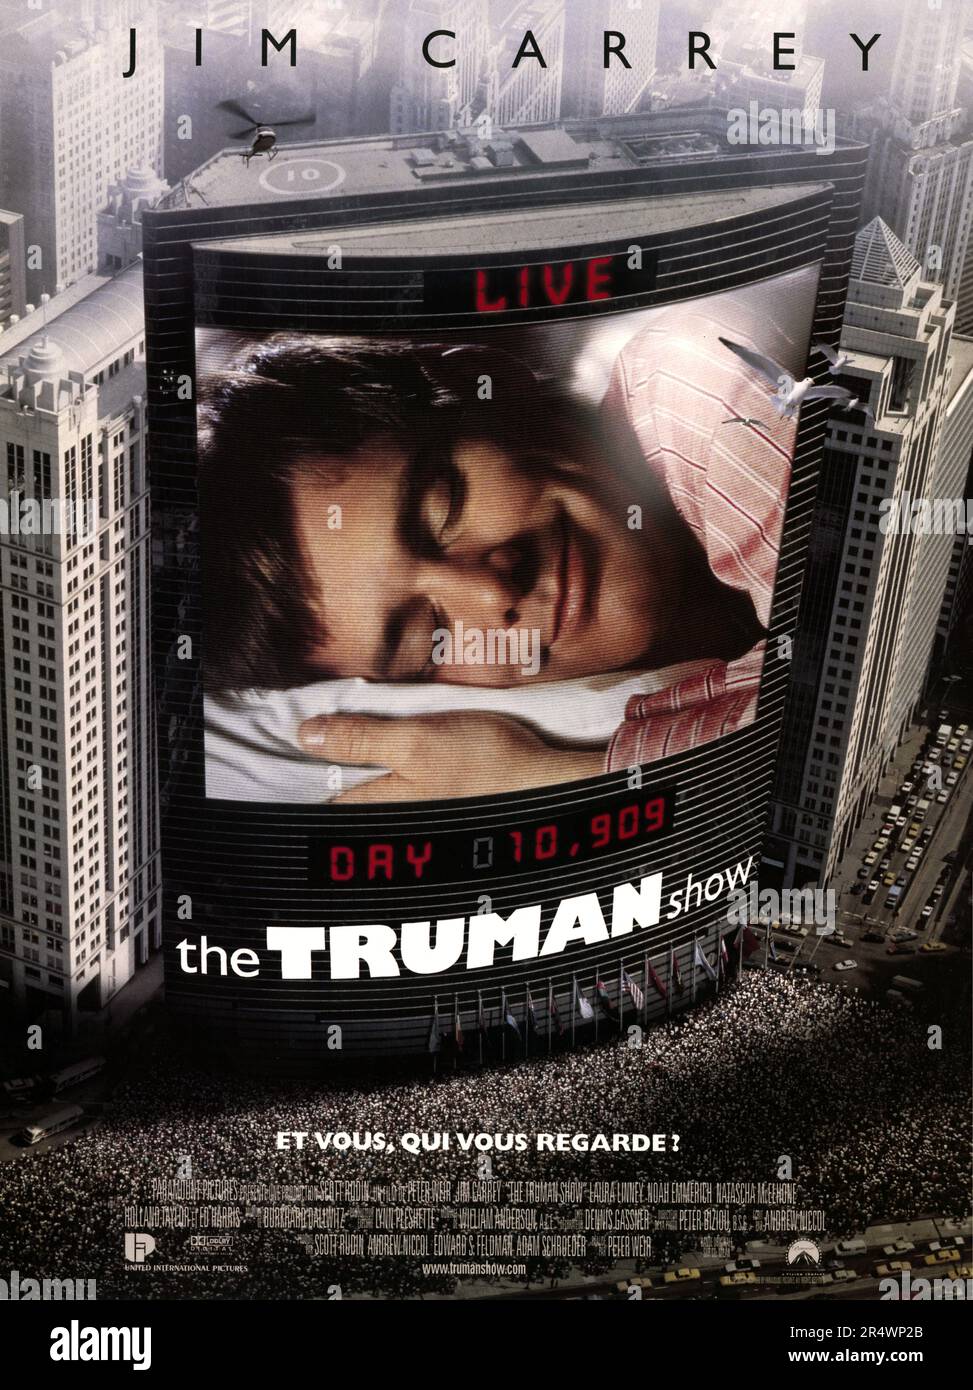 The Truman Show  Year : 1998 USA Director : Peter Weir Jim Carrey  French poster Stock Photo